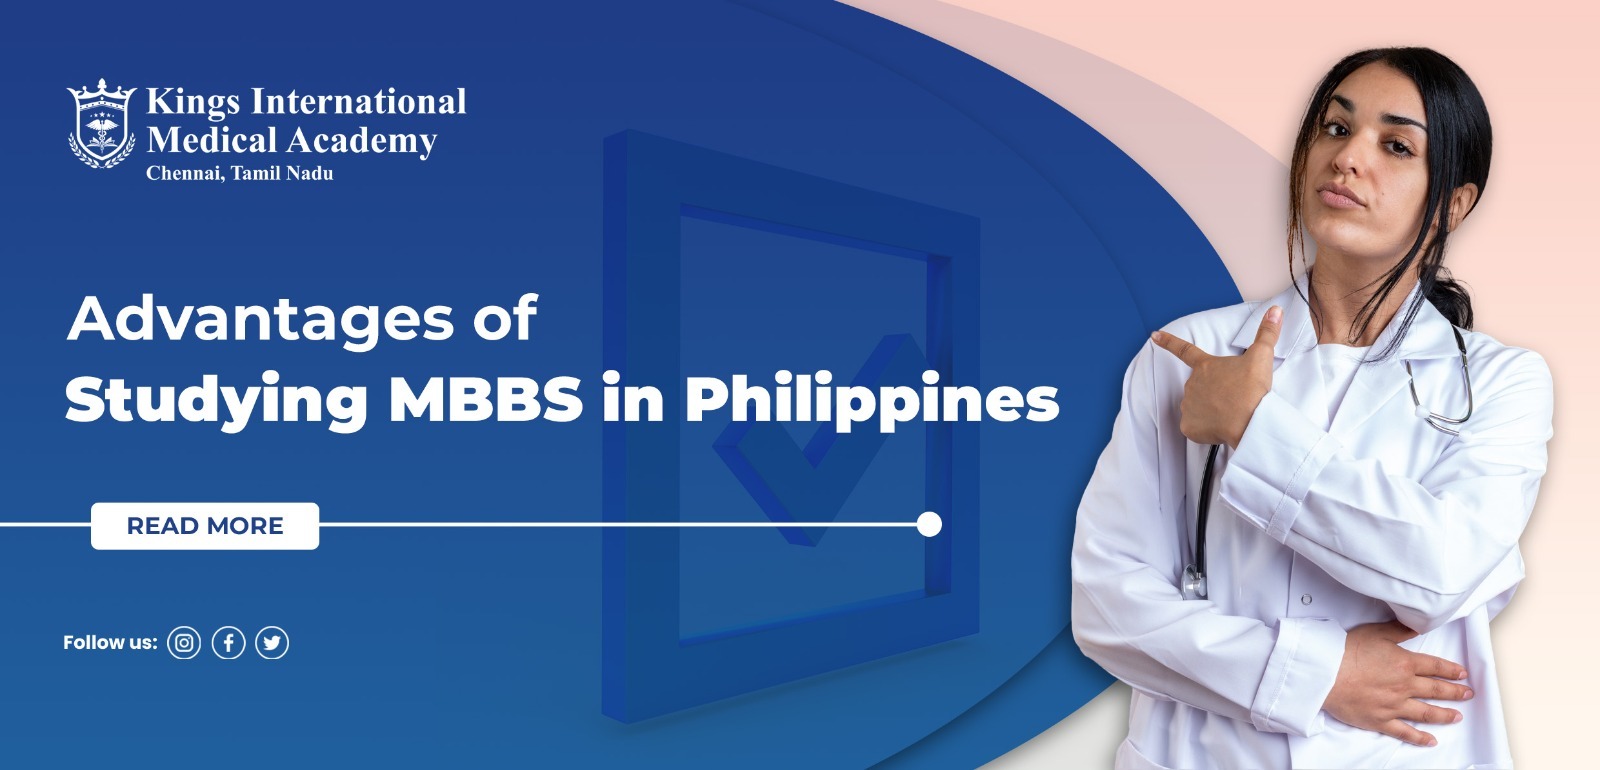 Advantages of Studying MBBS in Philippines